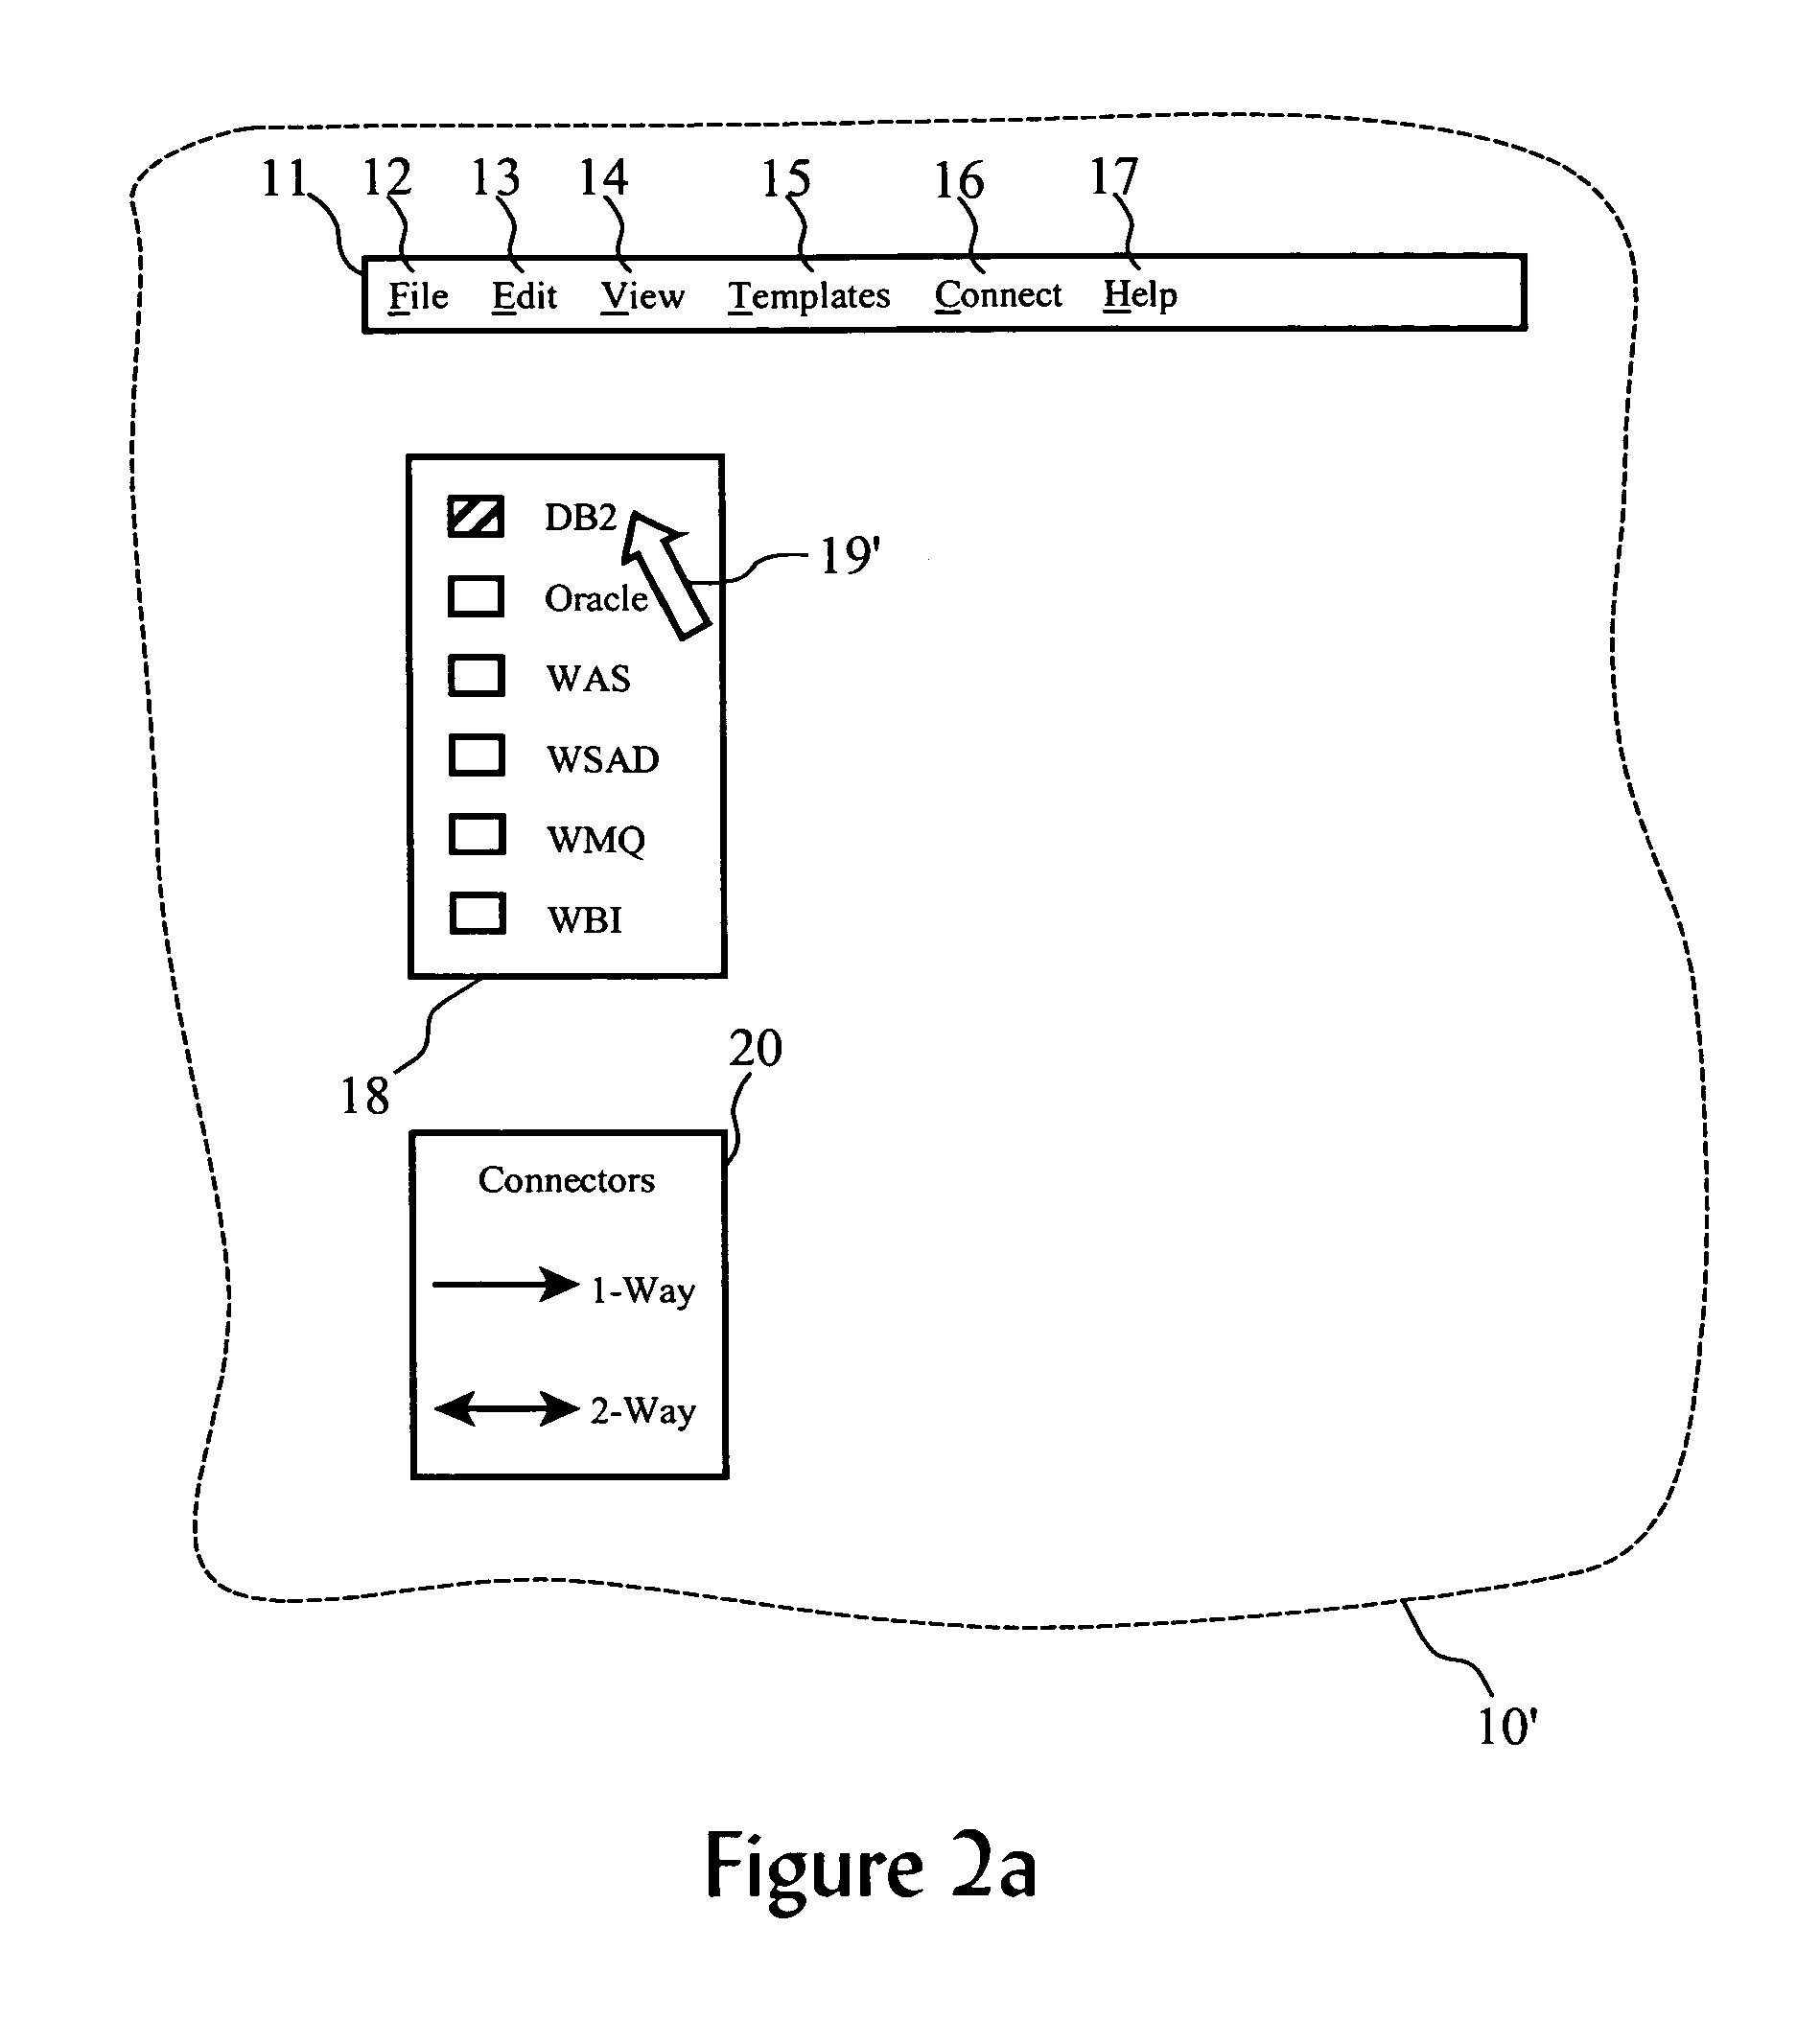 Automatic generation of license package for solution components